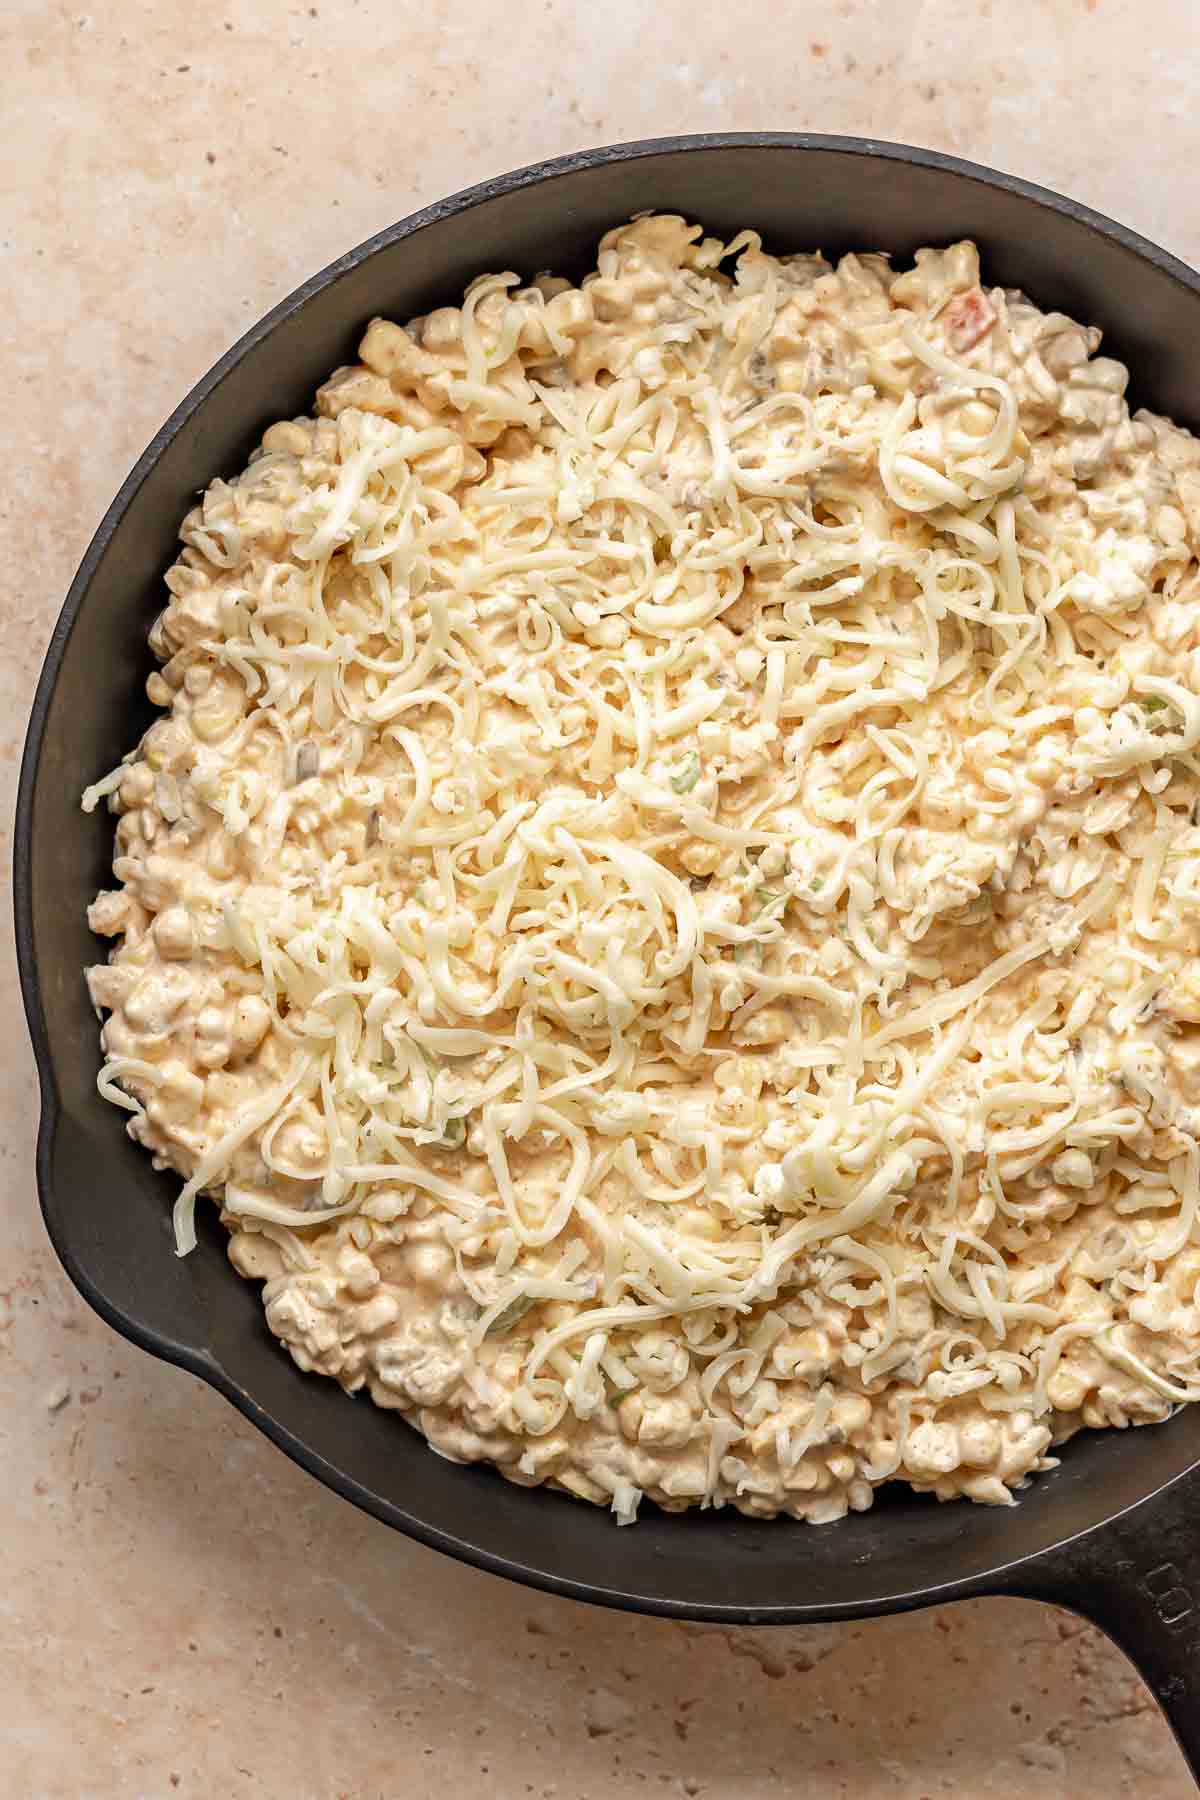 Corn dip in a skillet with shredded cheese on top.